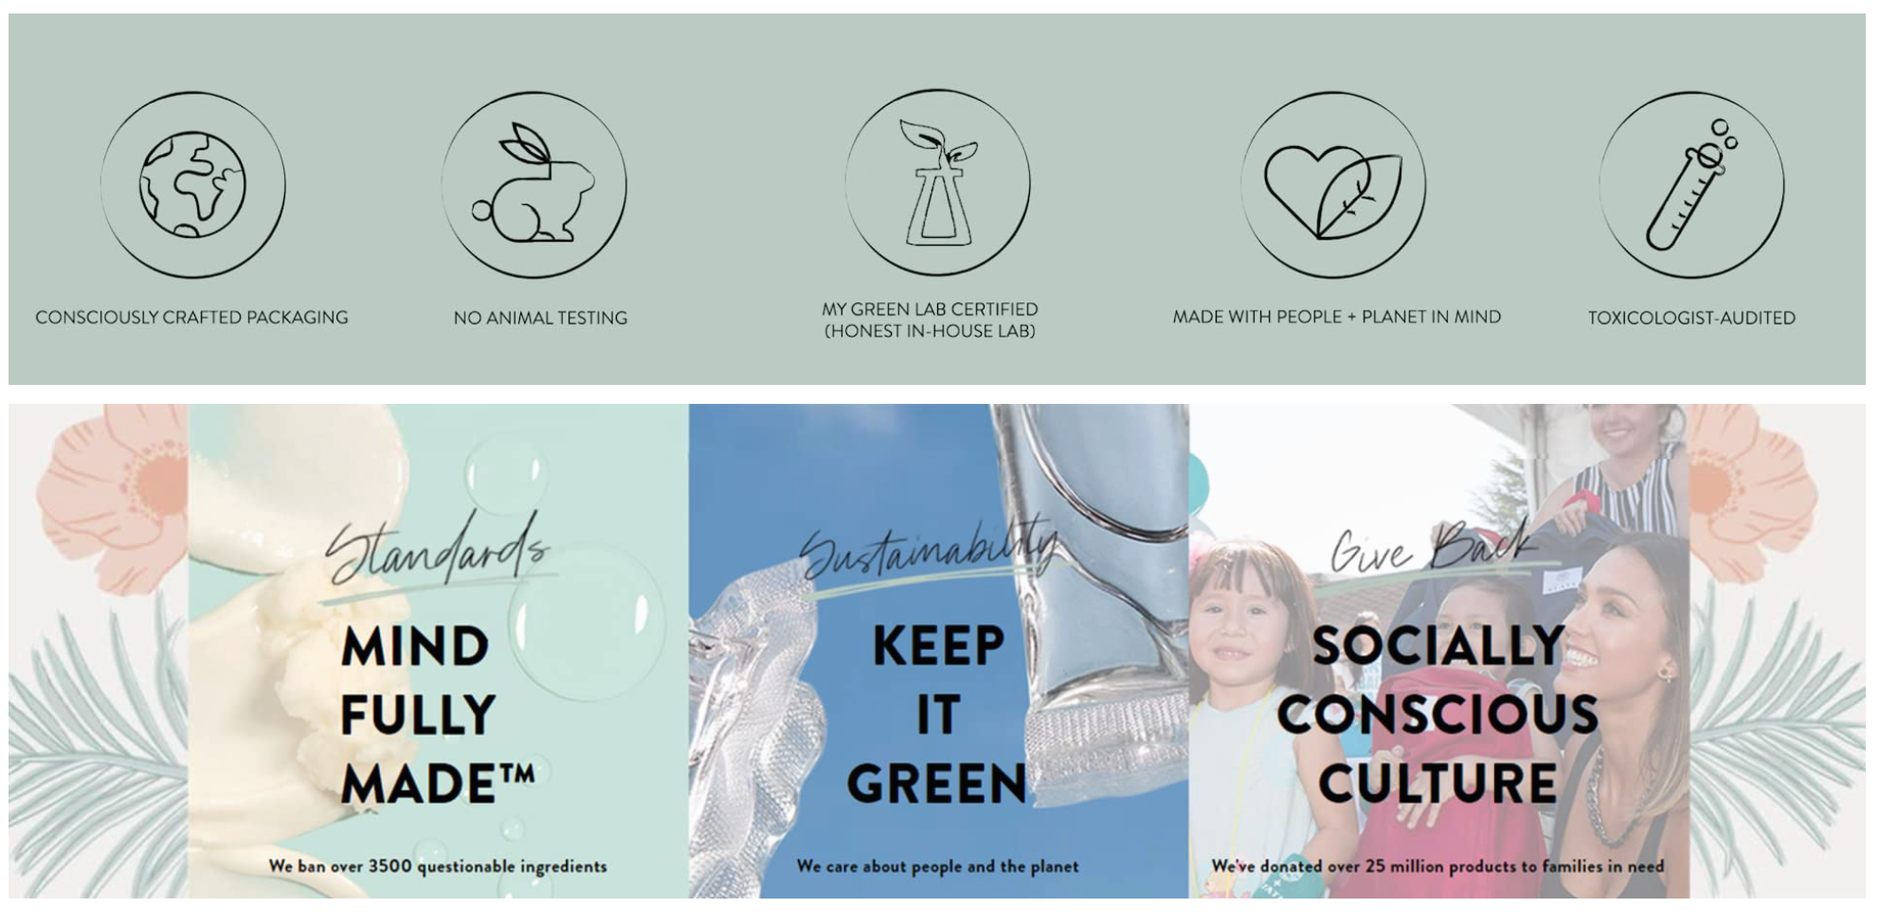 Example of a dedicated sustainability page in the Brand Store